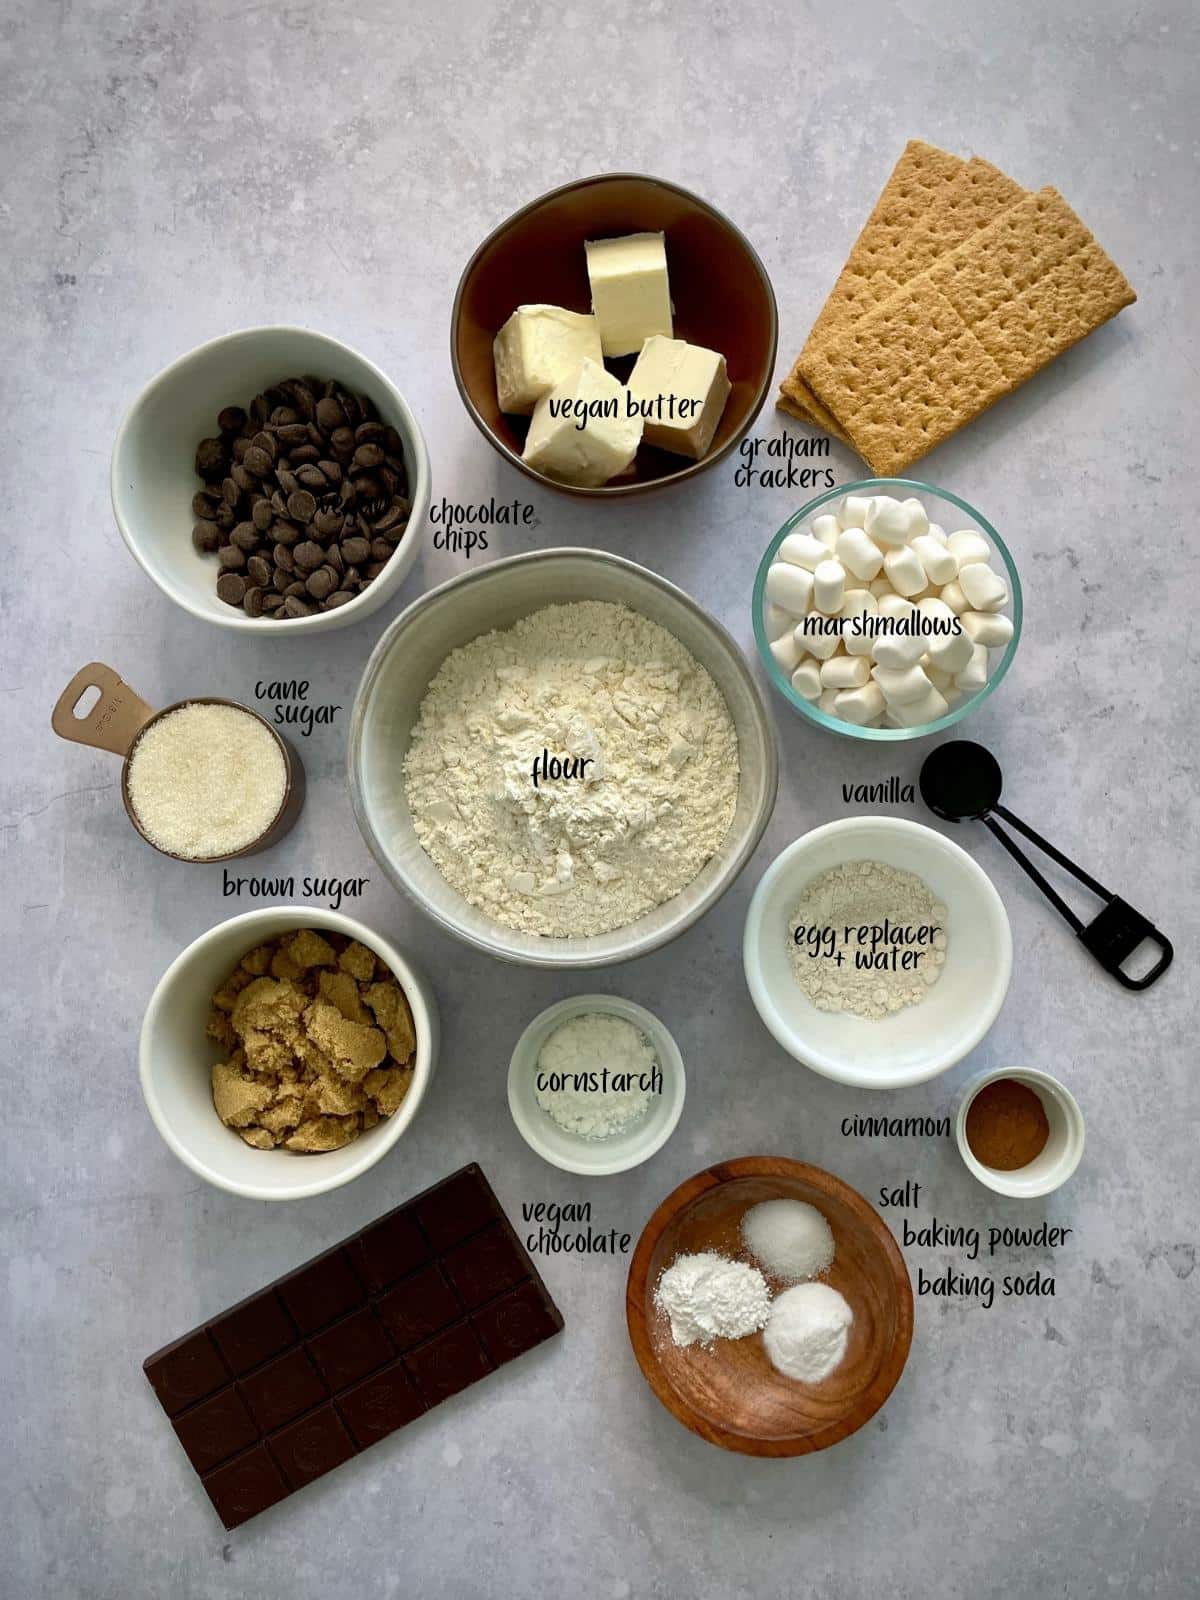 Labeled ingredients for smores cookies.